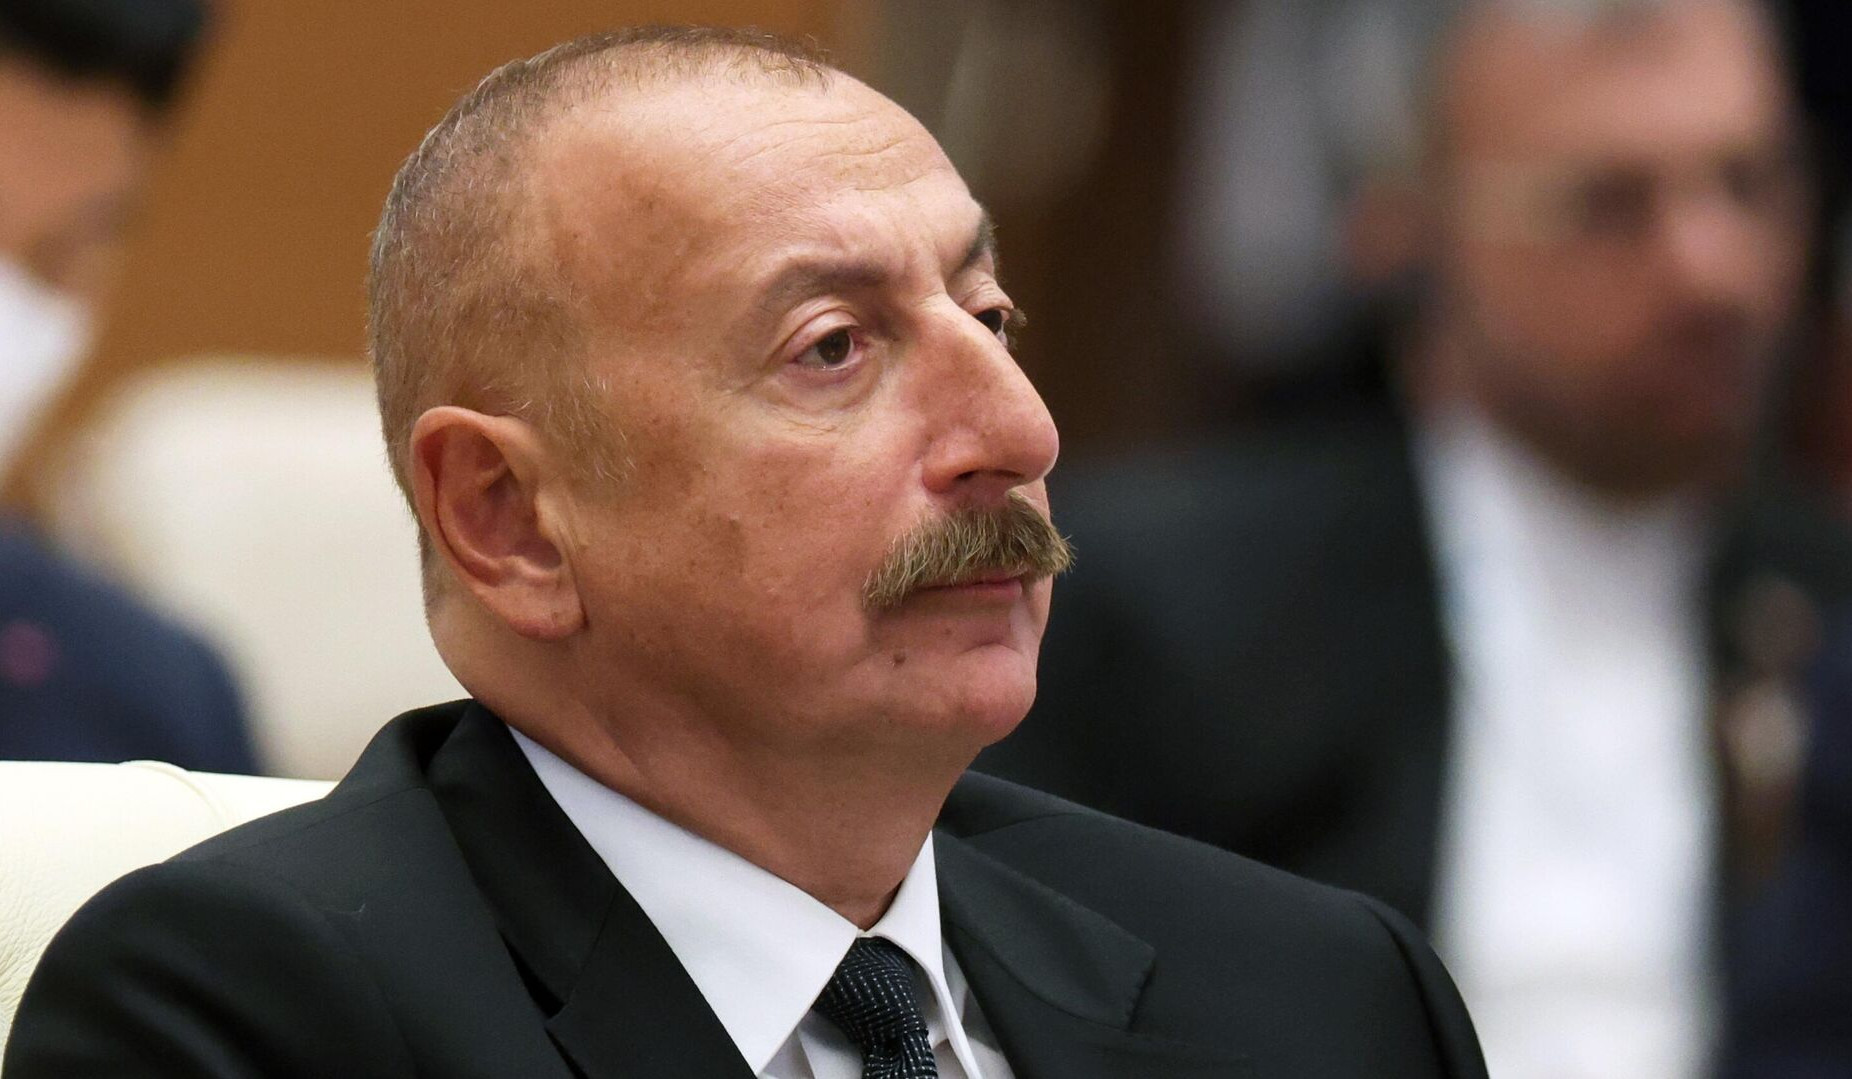 We have shown how peace can be achieved through military force: Aliyev